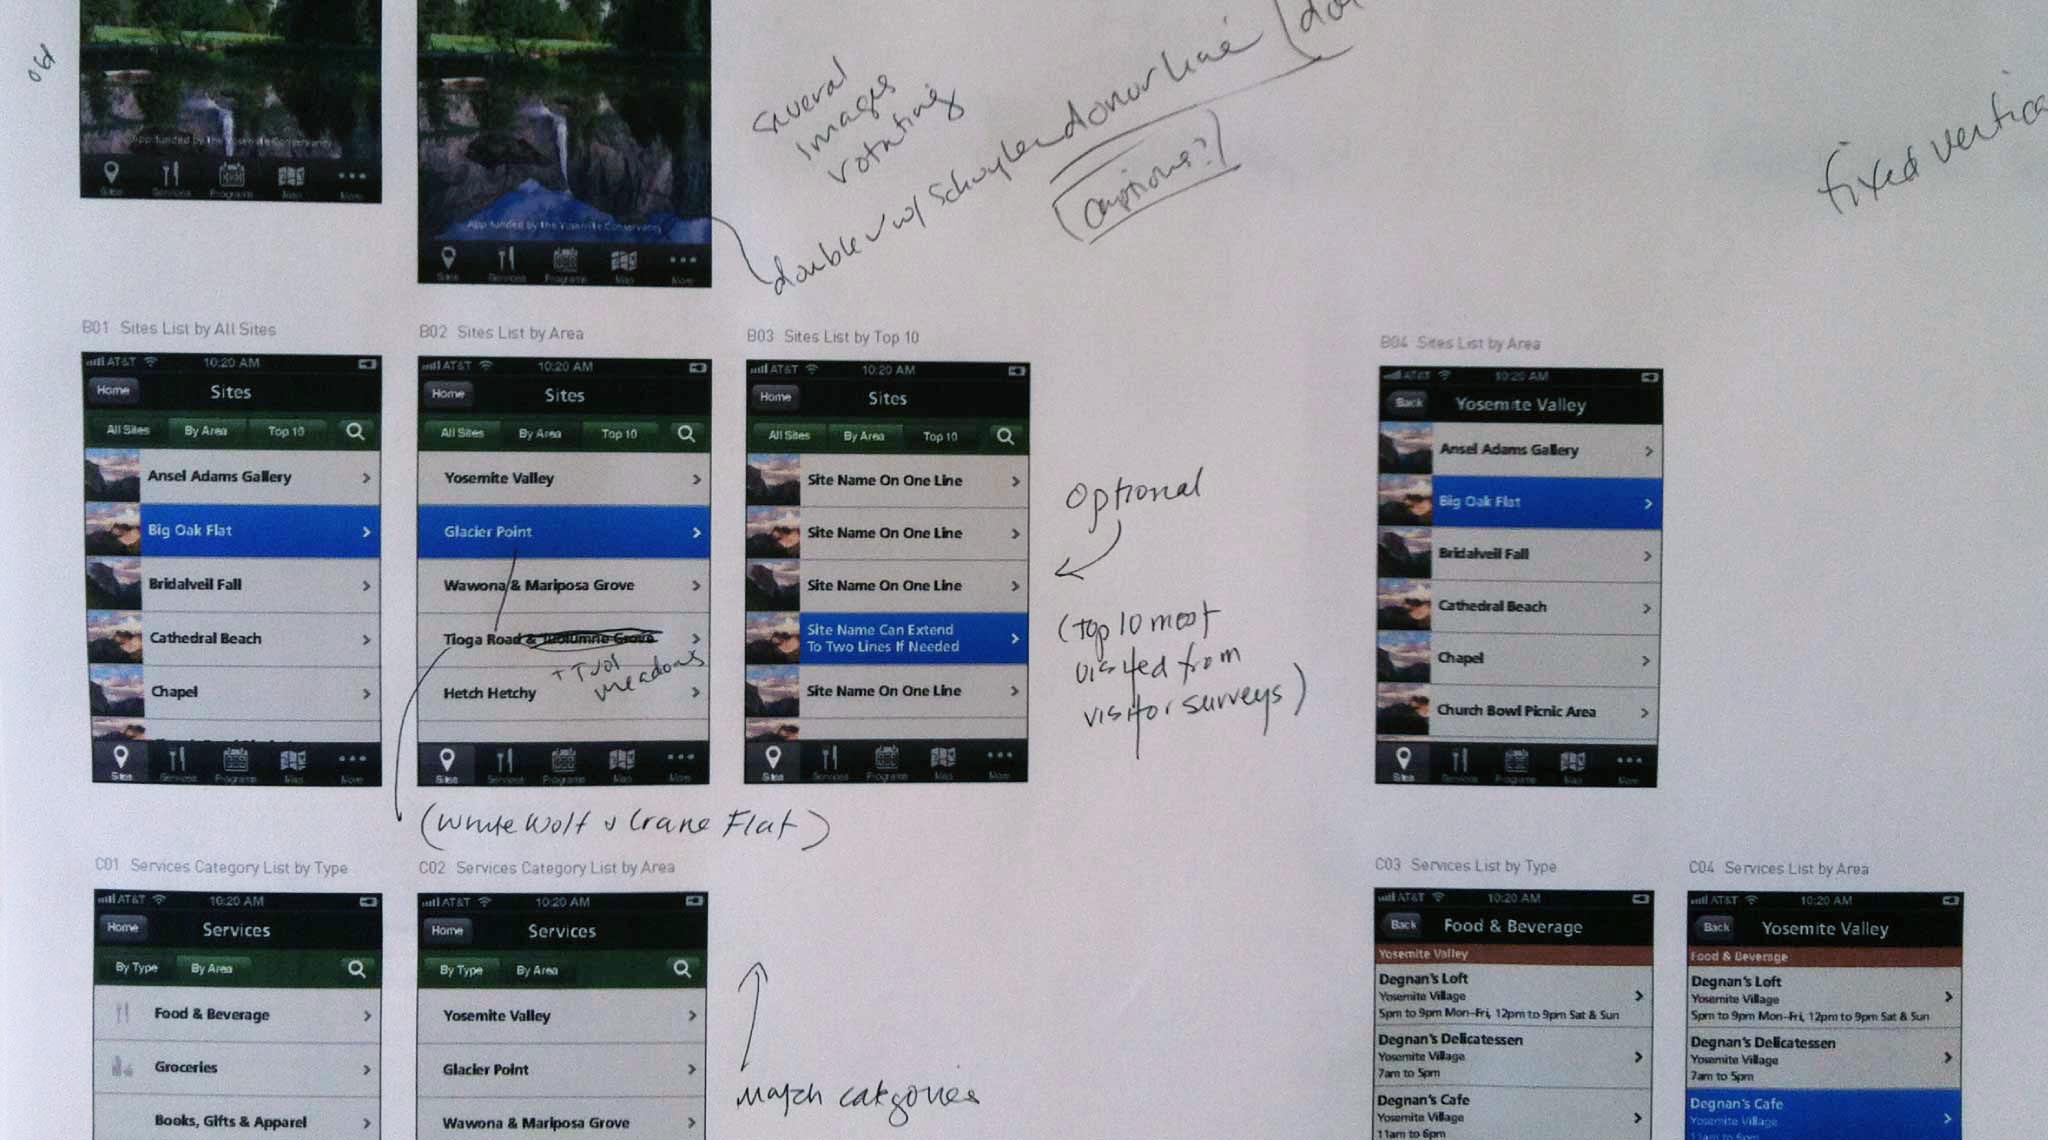 Slider Image: Print out of app visual design with hand-written design comments and notes